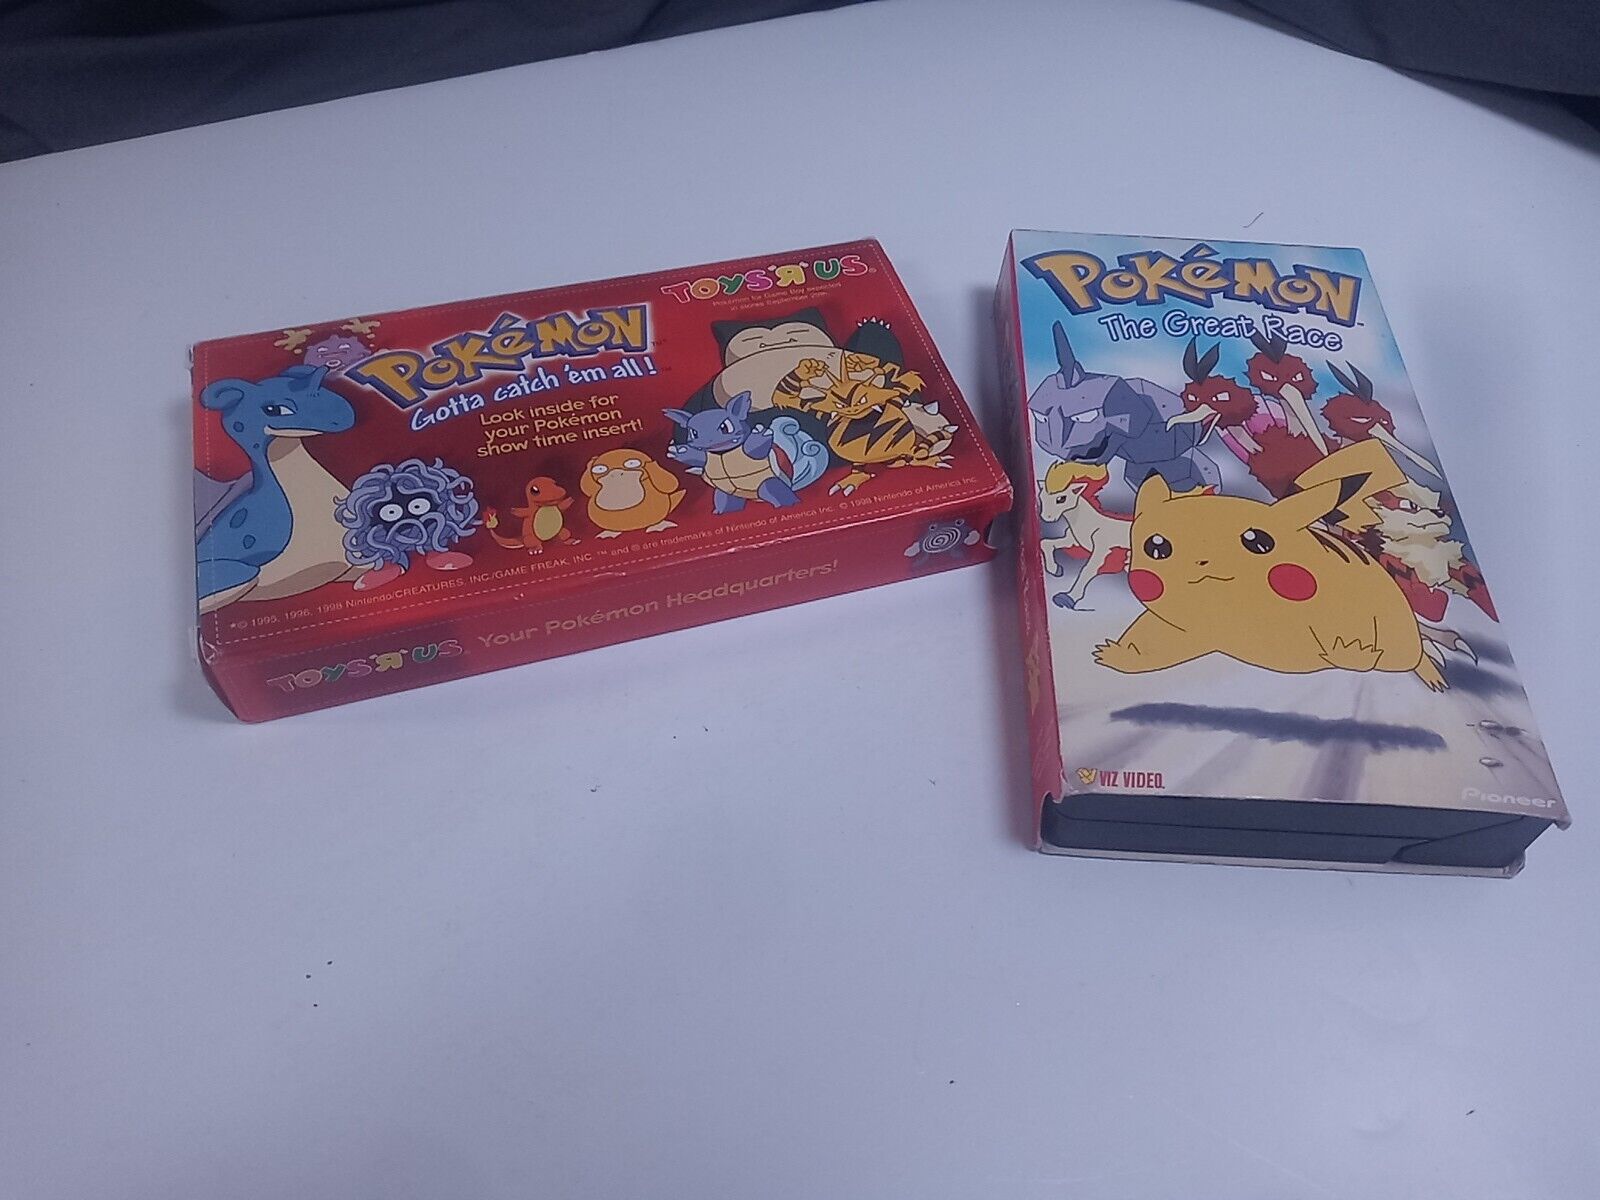 Pokemon Gotta Catch ‘Em All VHS - 1998 Promotional Video And Great Race